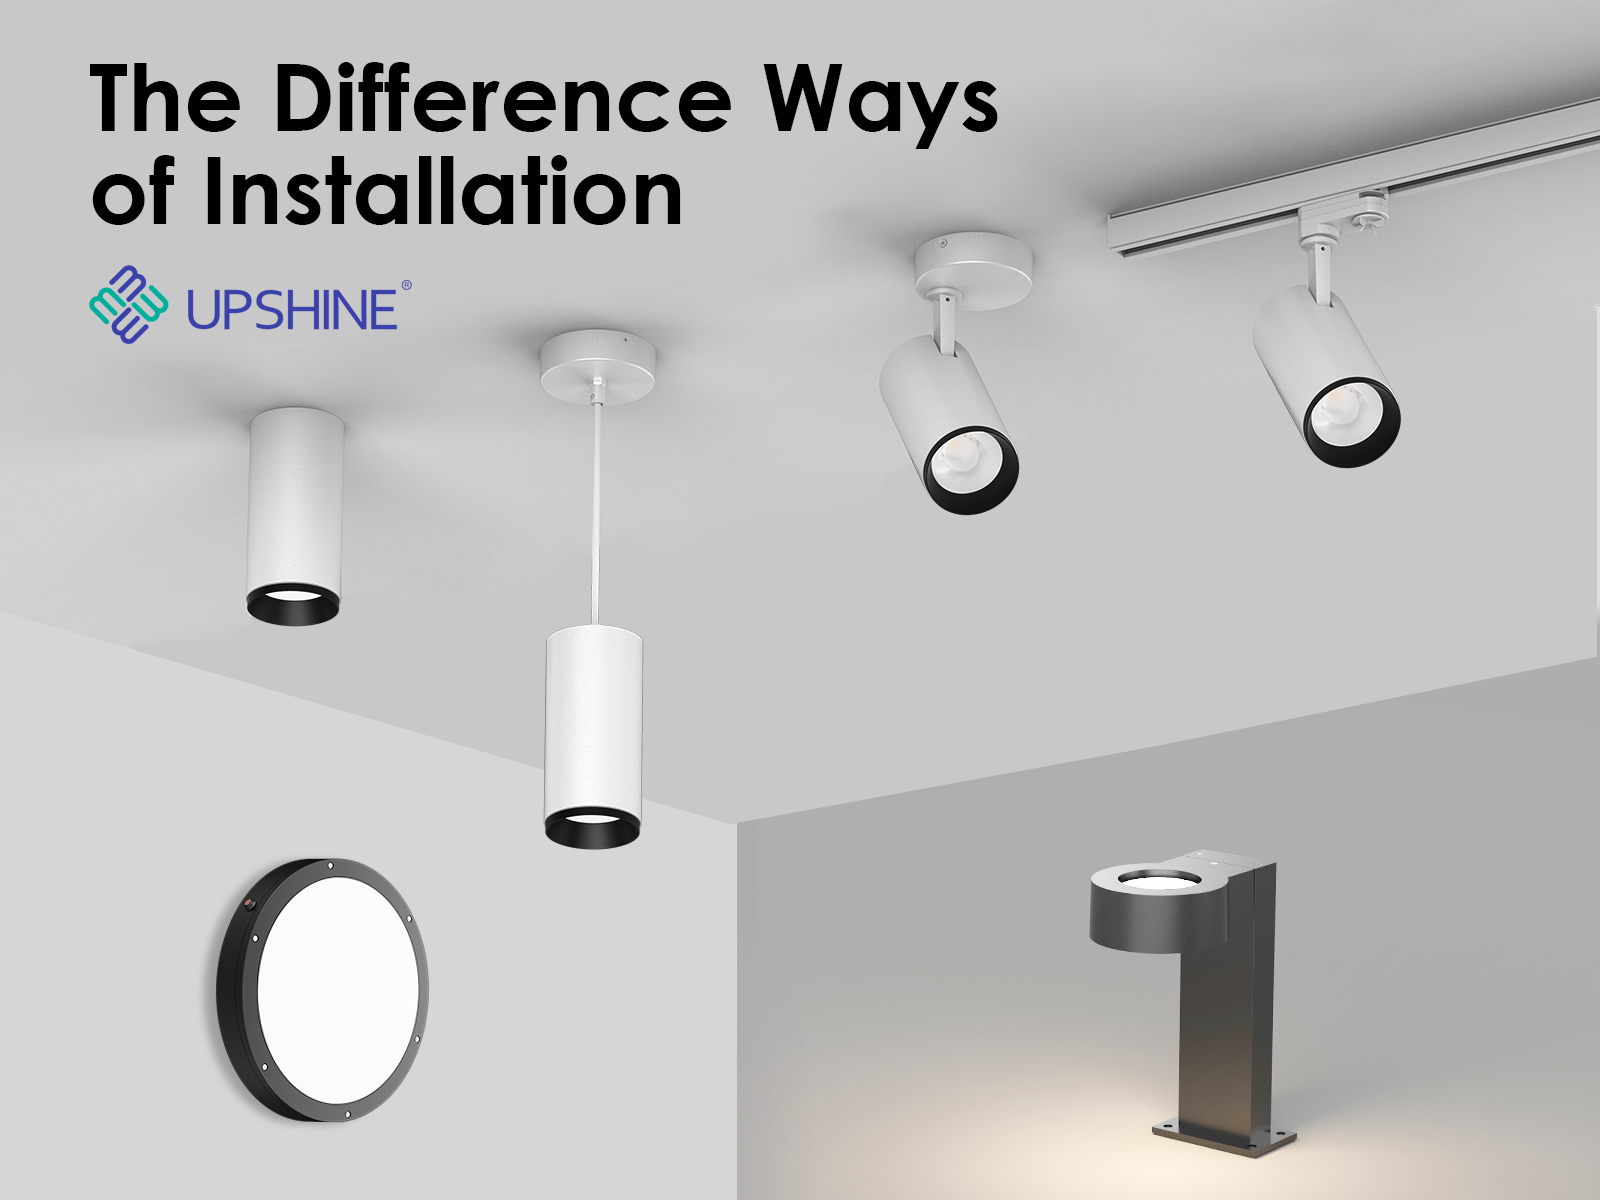 What Kinds of Ways of Installation of LED Lighting?